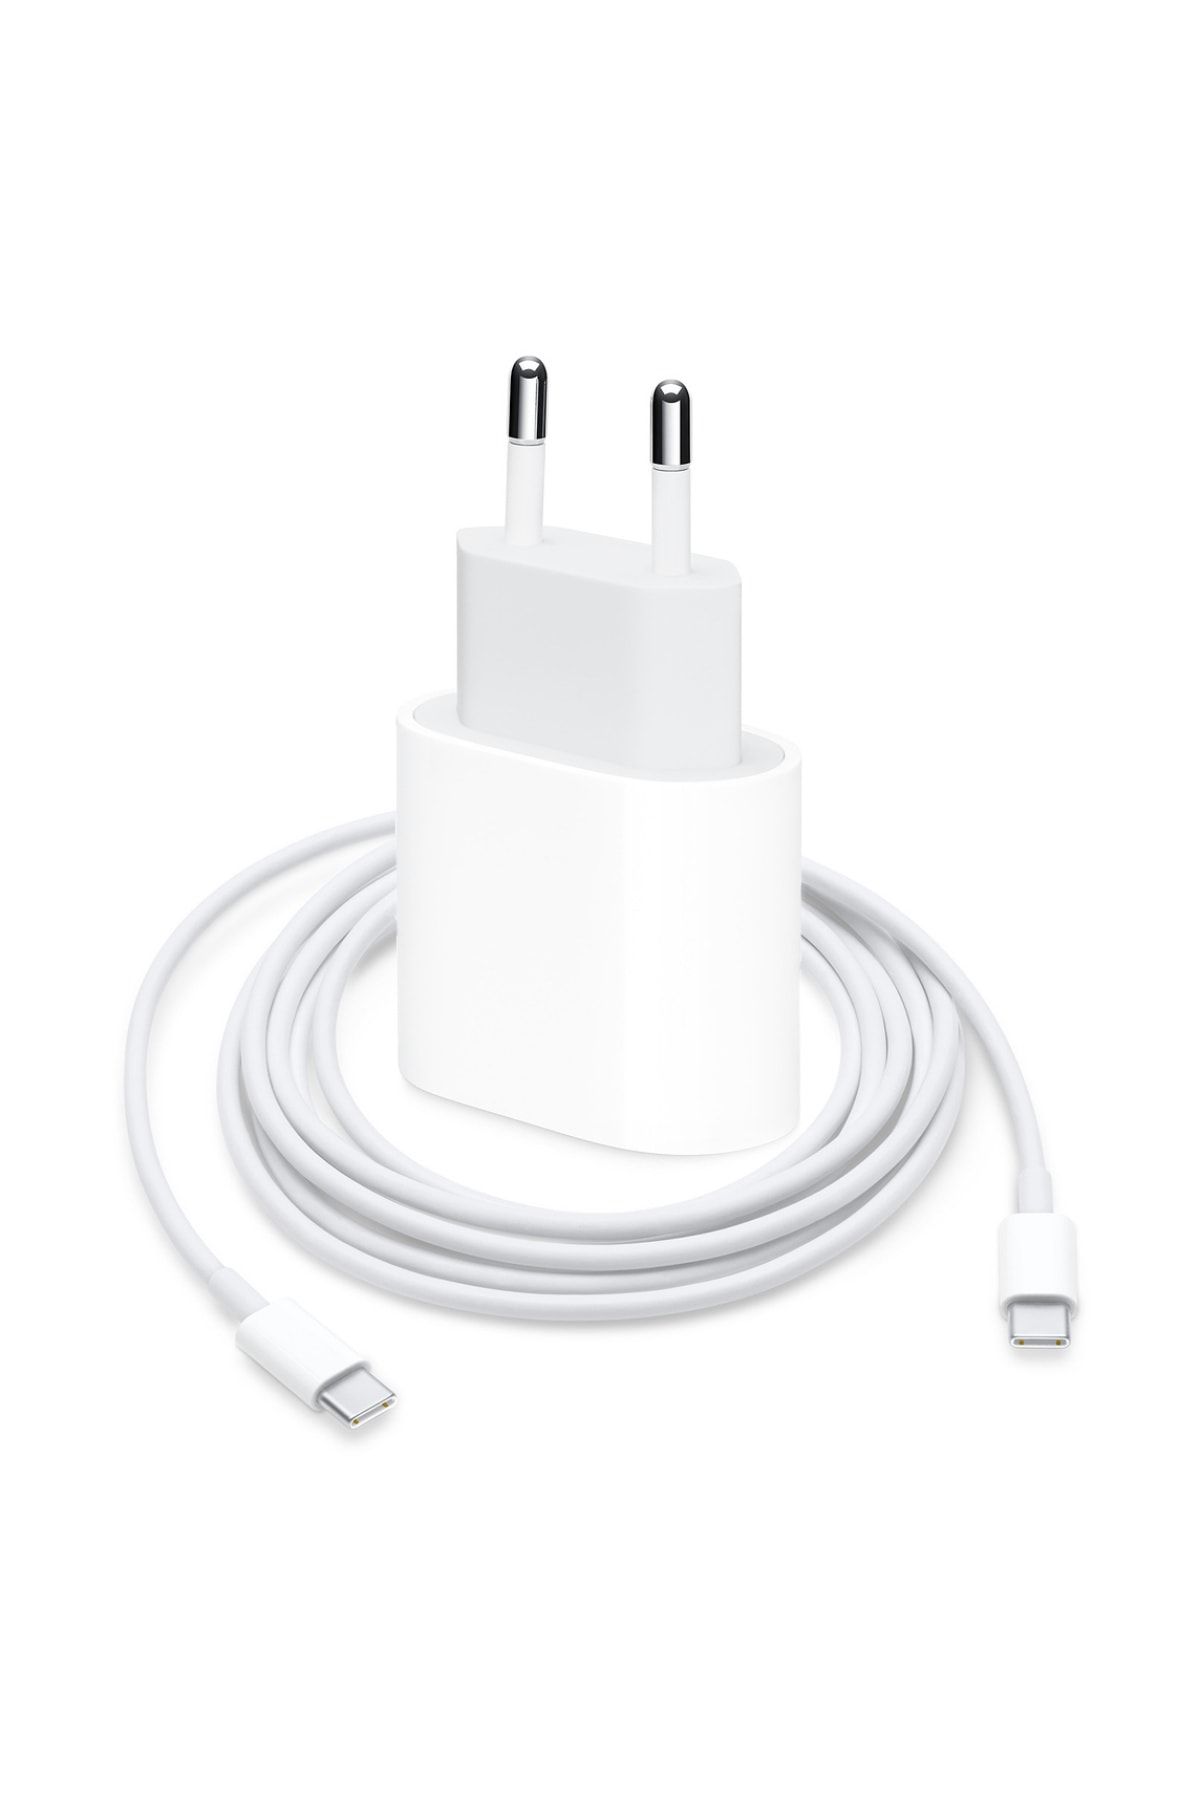 apple macbook air charger 2018